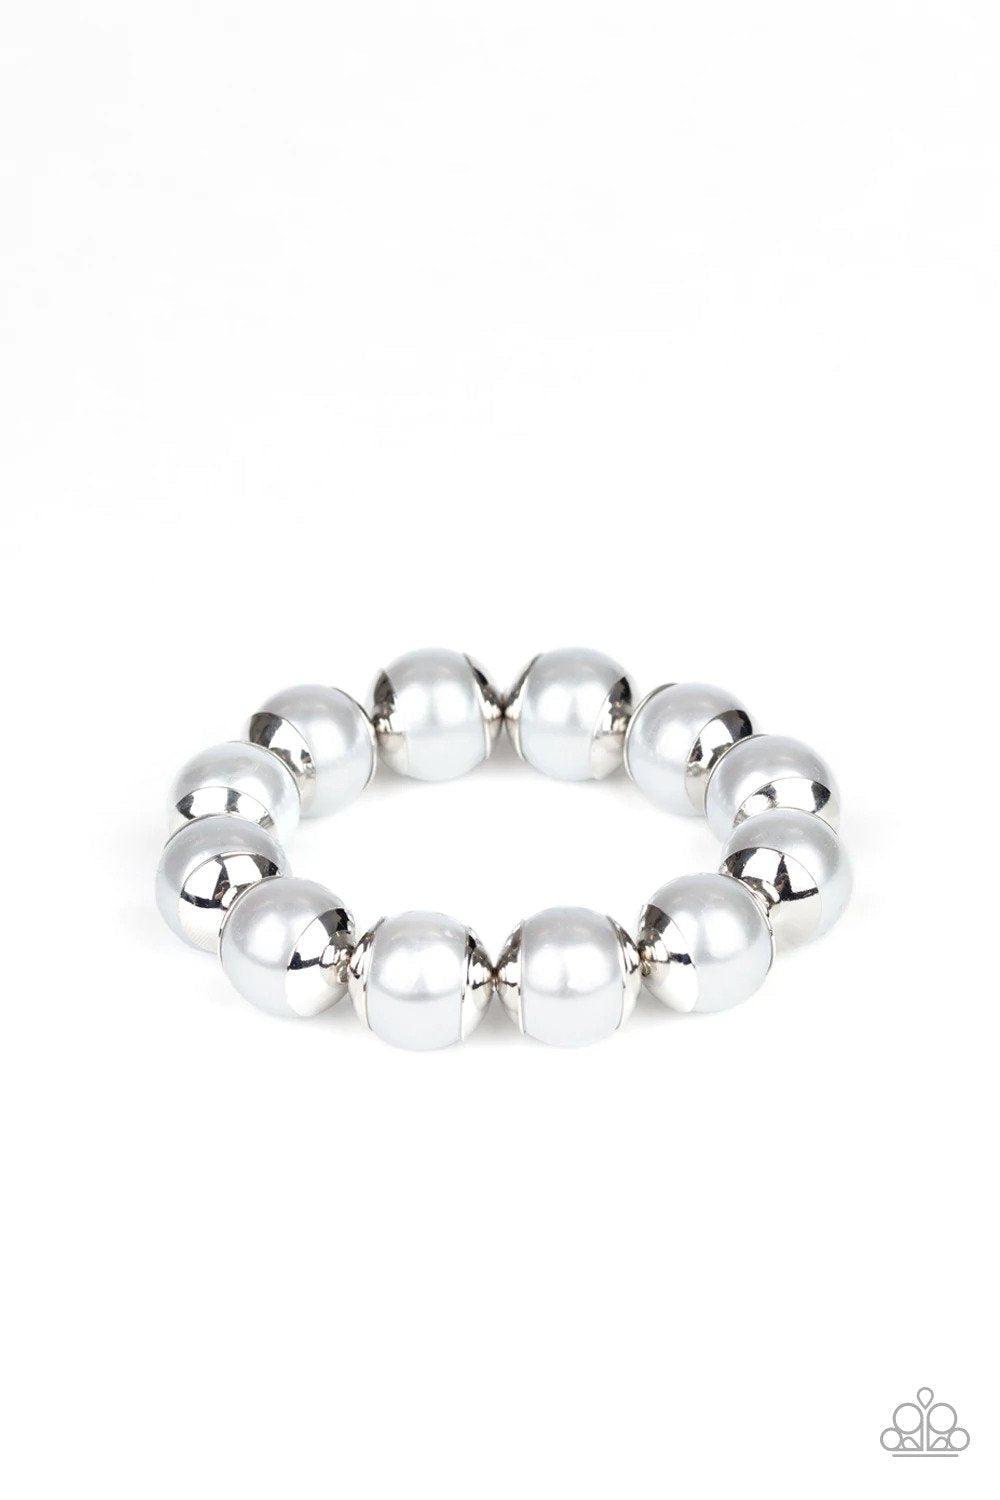 One Woman Show-STOPPER Silver Pearl Bracelet - Paparazzi Accessories- lightbox - CarasShop.com - $5 Jewelry by Cara Jewels